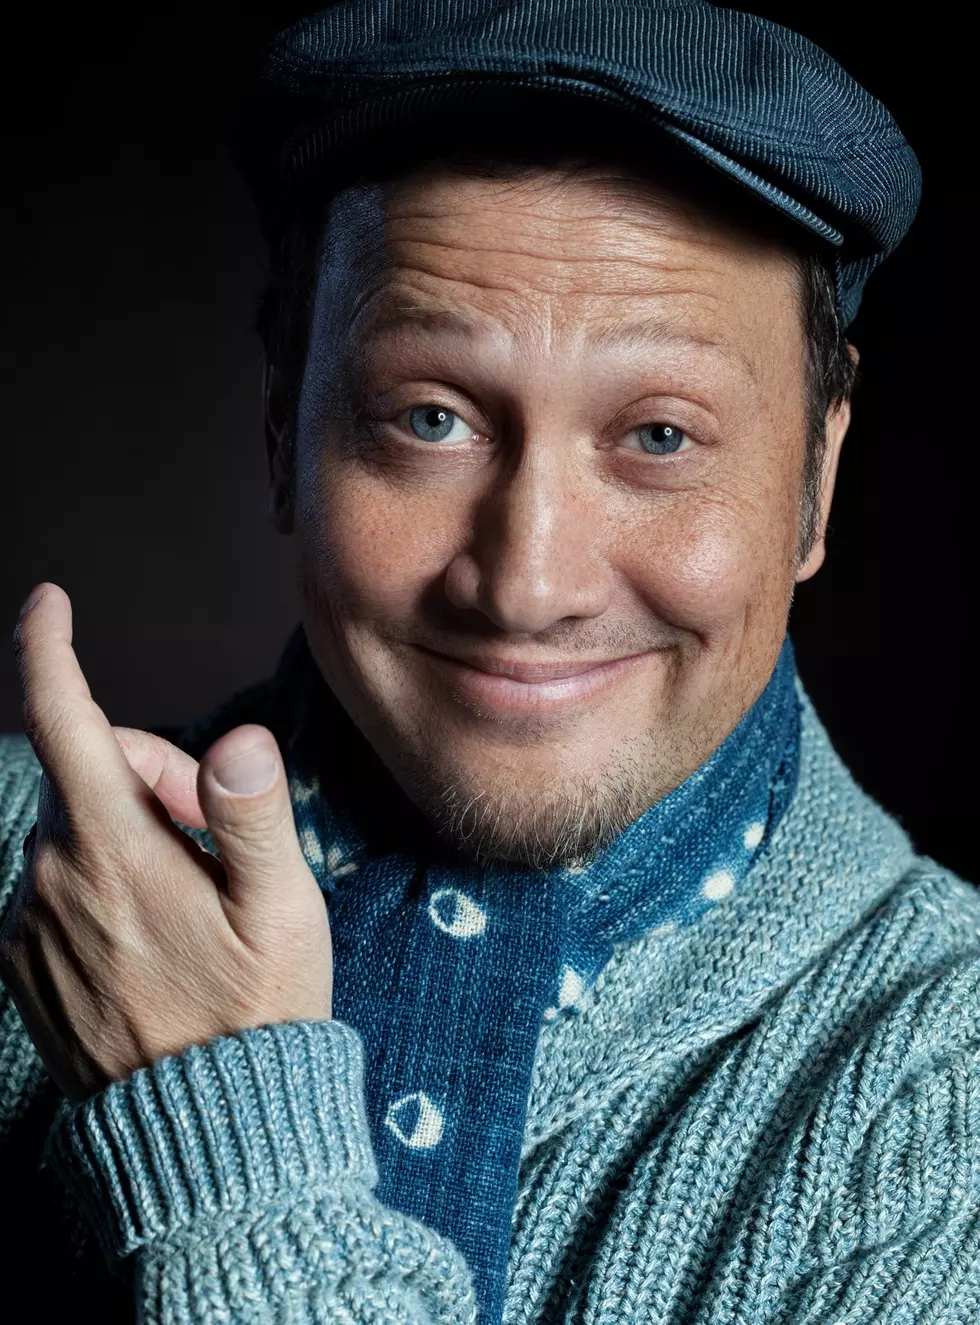 Comedian Rob Schneider to Perform at Hard Rock – For ‘Grown Ups’ Only